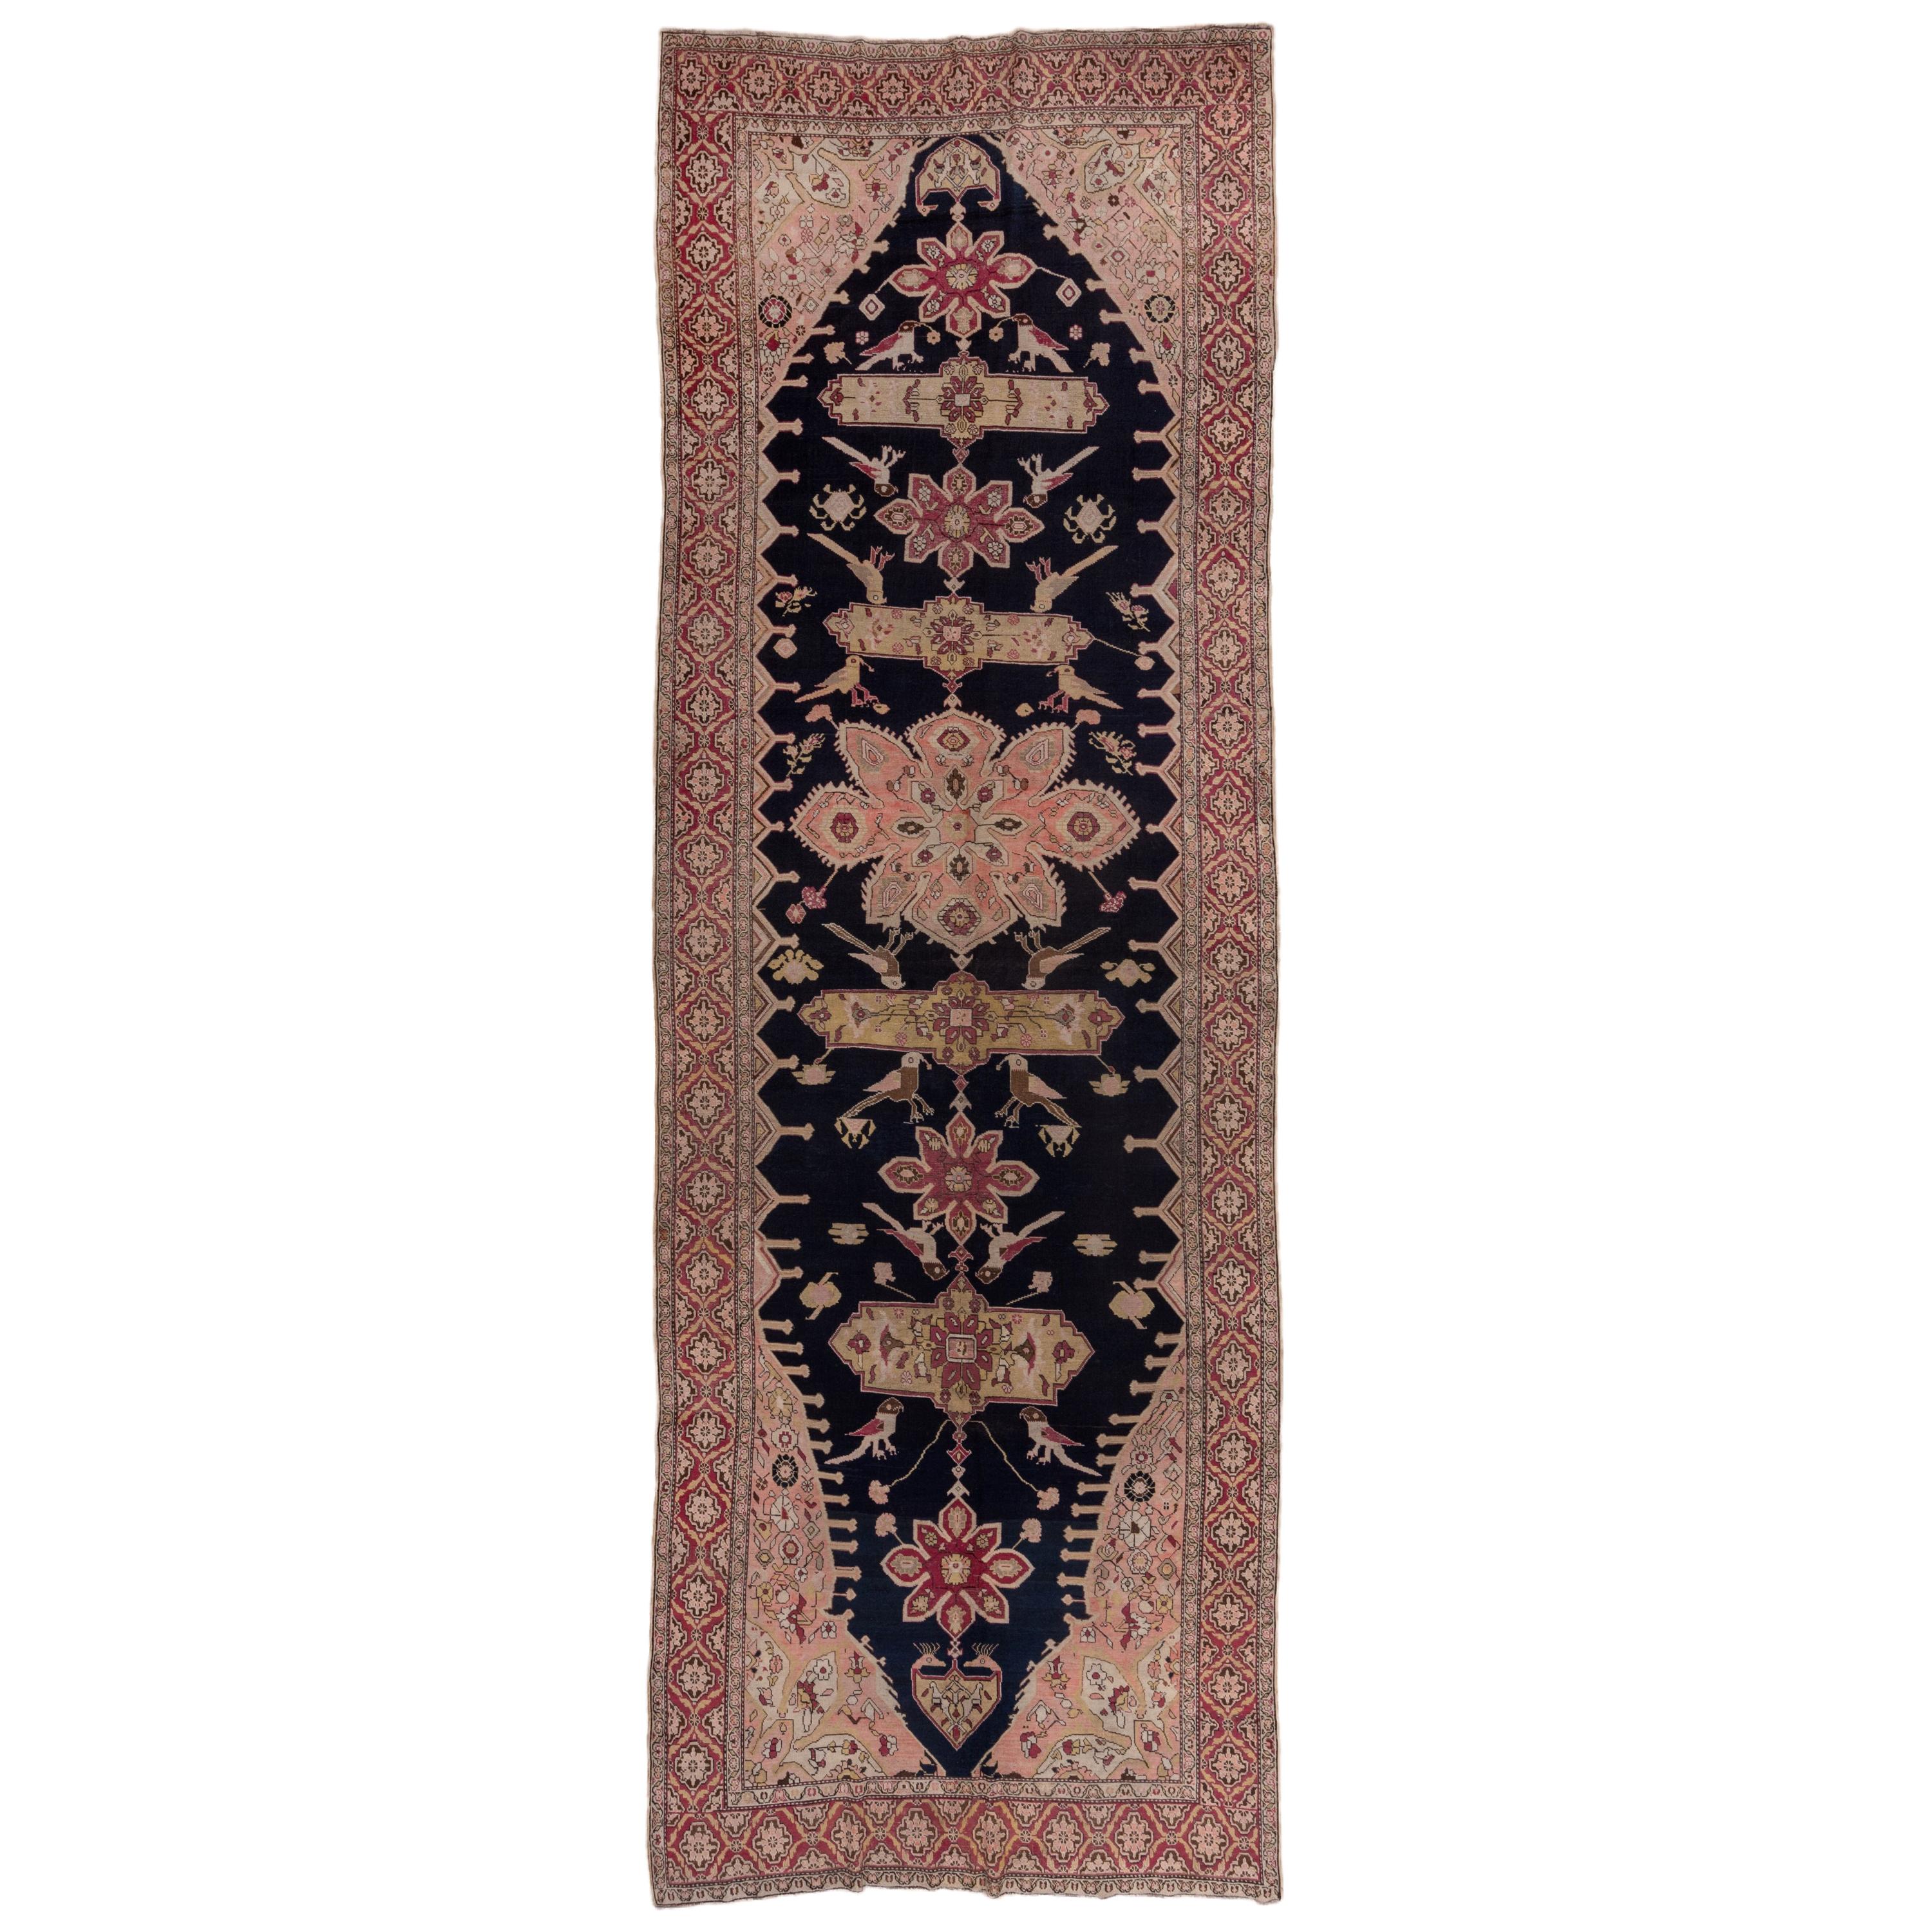 Antique Caucasian Karabagh Gallery Rug, Navy and Pink Field, Raspberry Borders